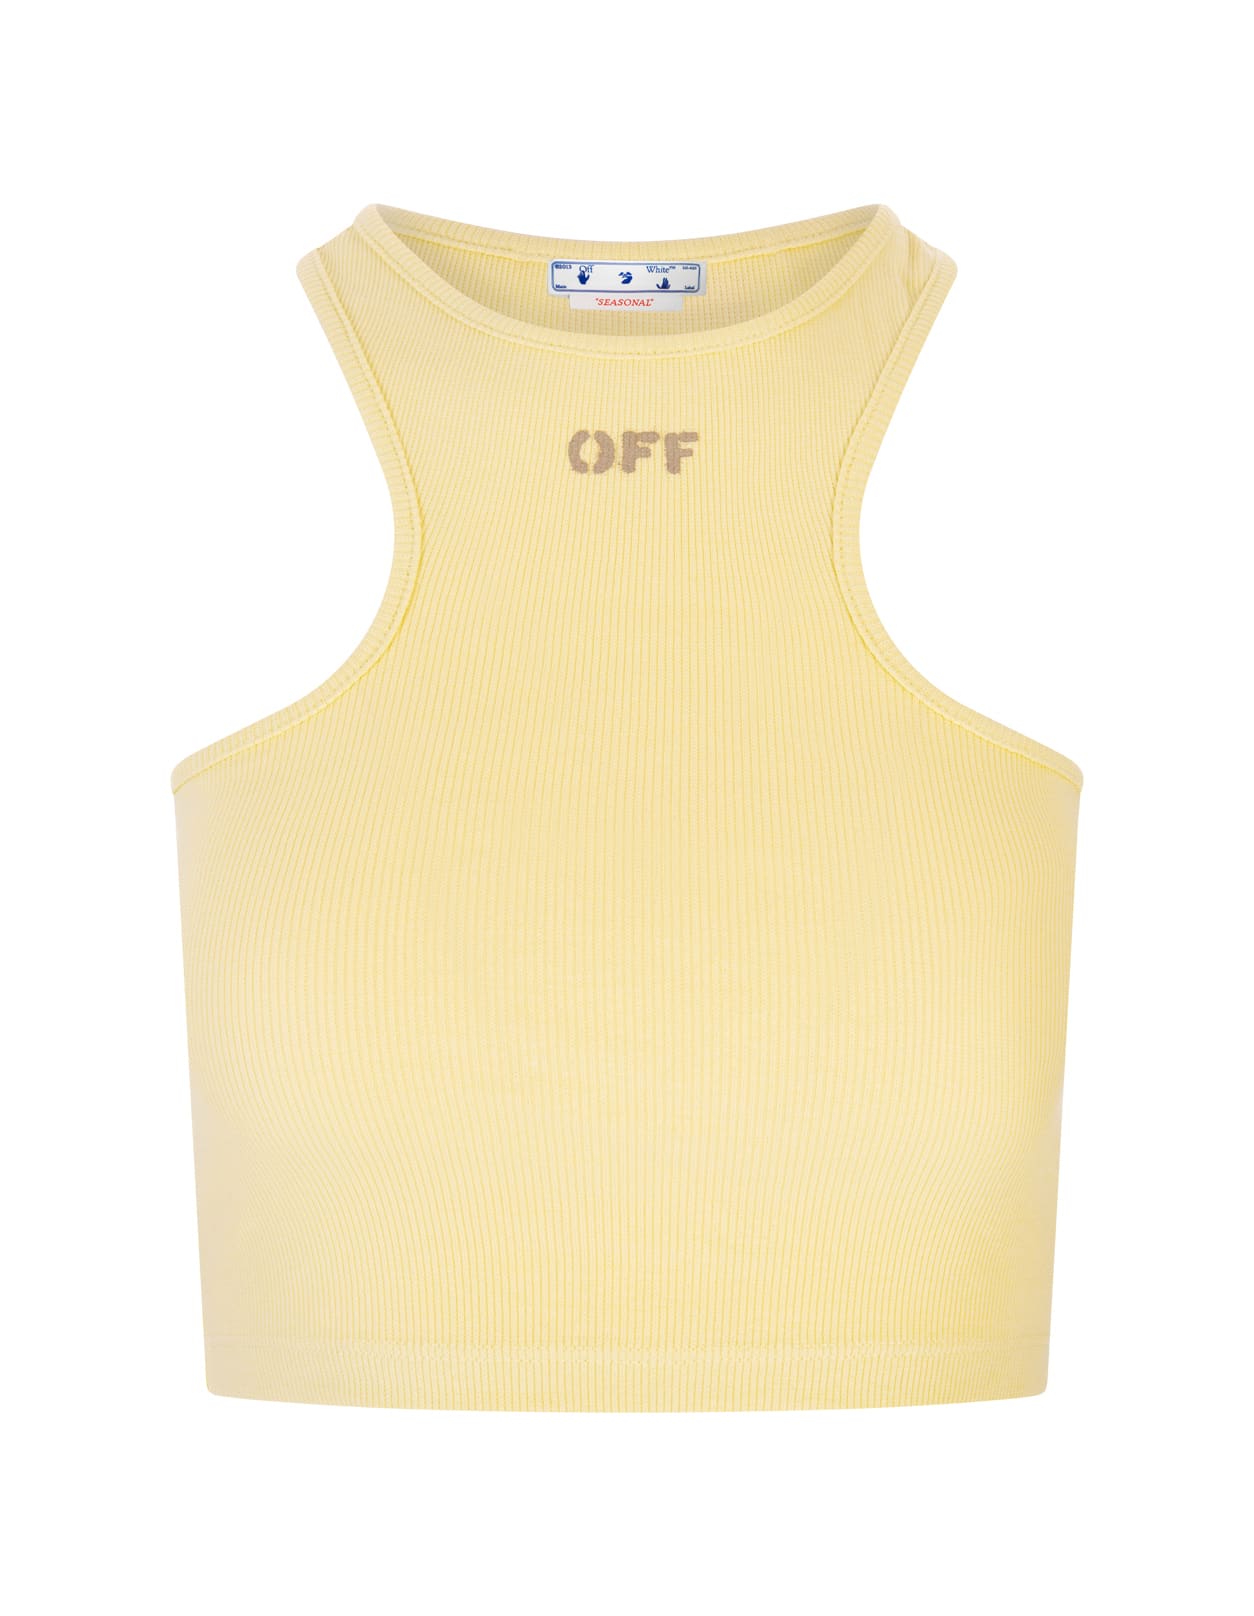 Off-White Woman Yellow Off Stamp Ribbed Rowing Top